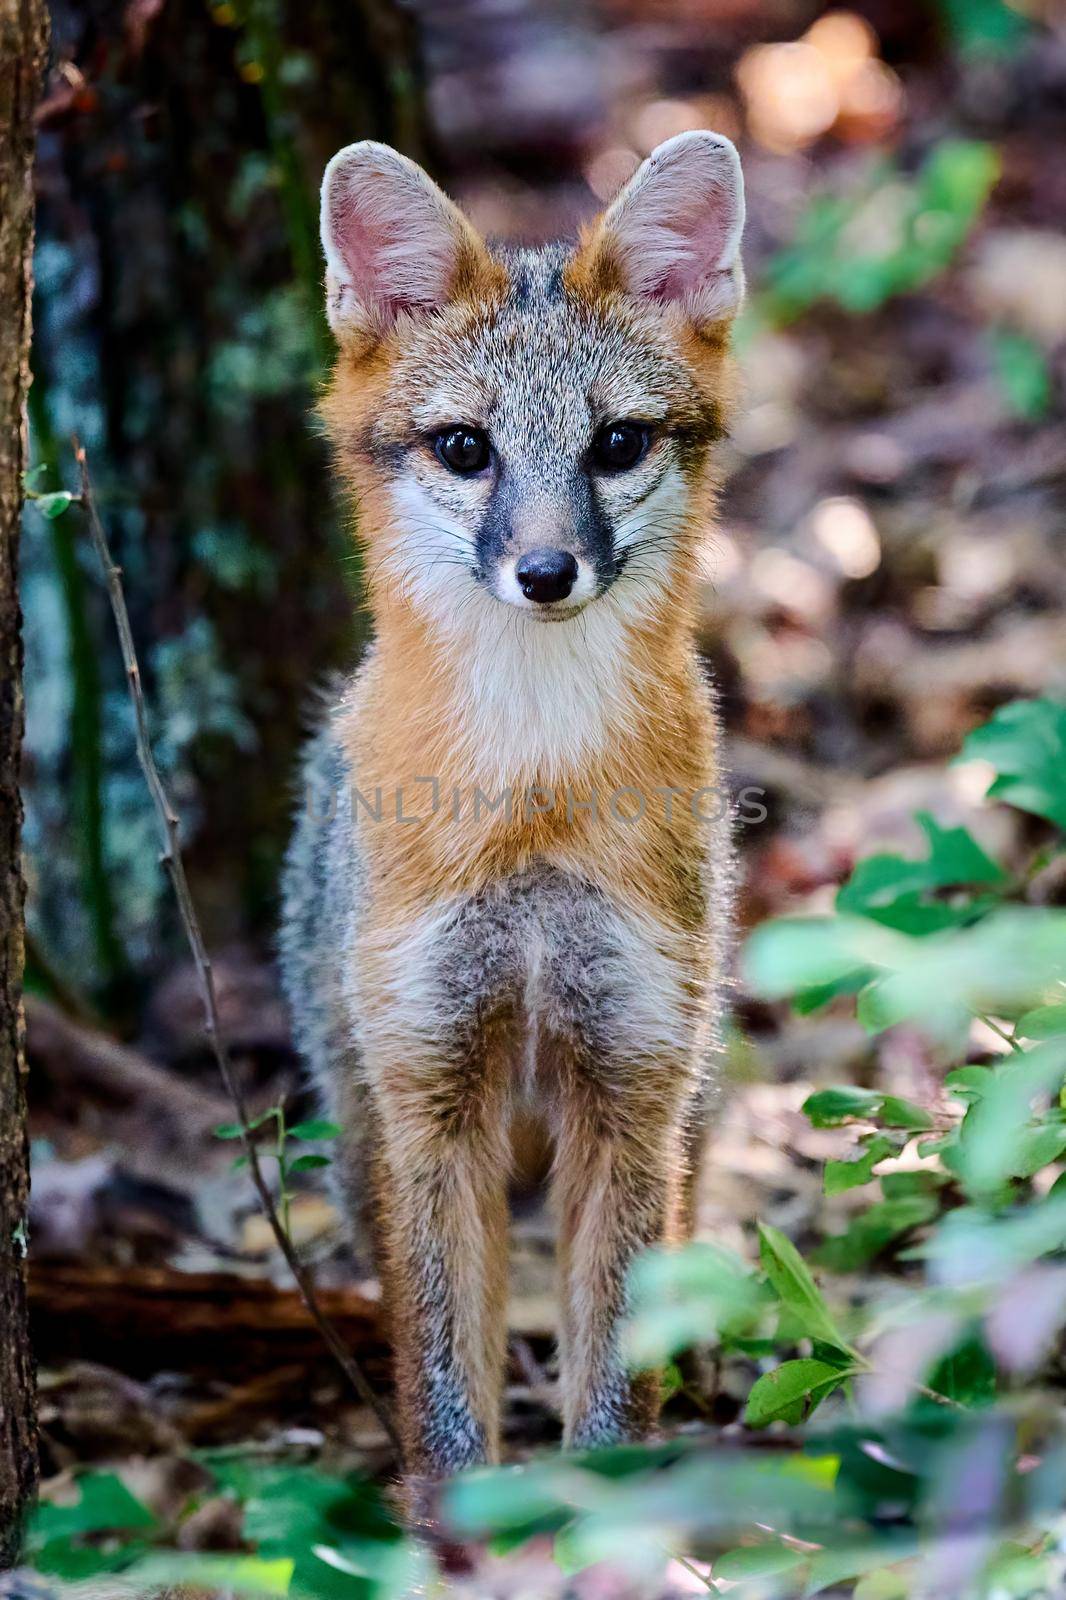 Juvenile Gray Fox Kit (Urocyon cinereoargenteus) in a forest staring at the camera.